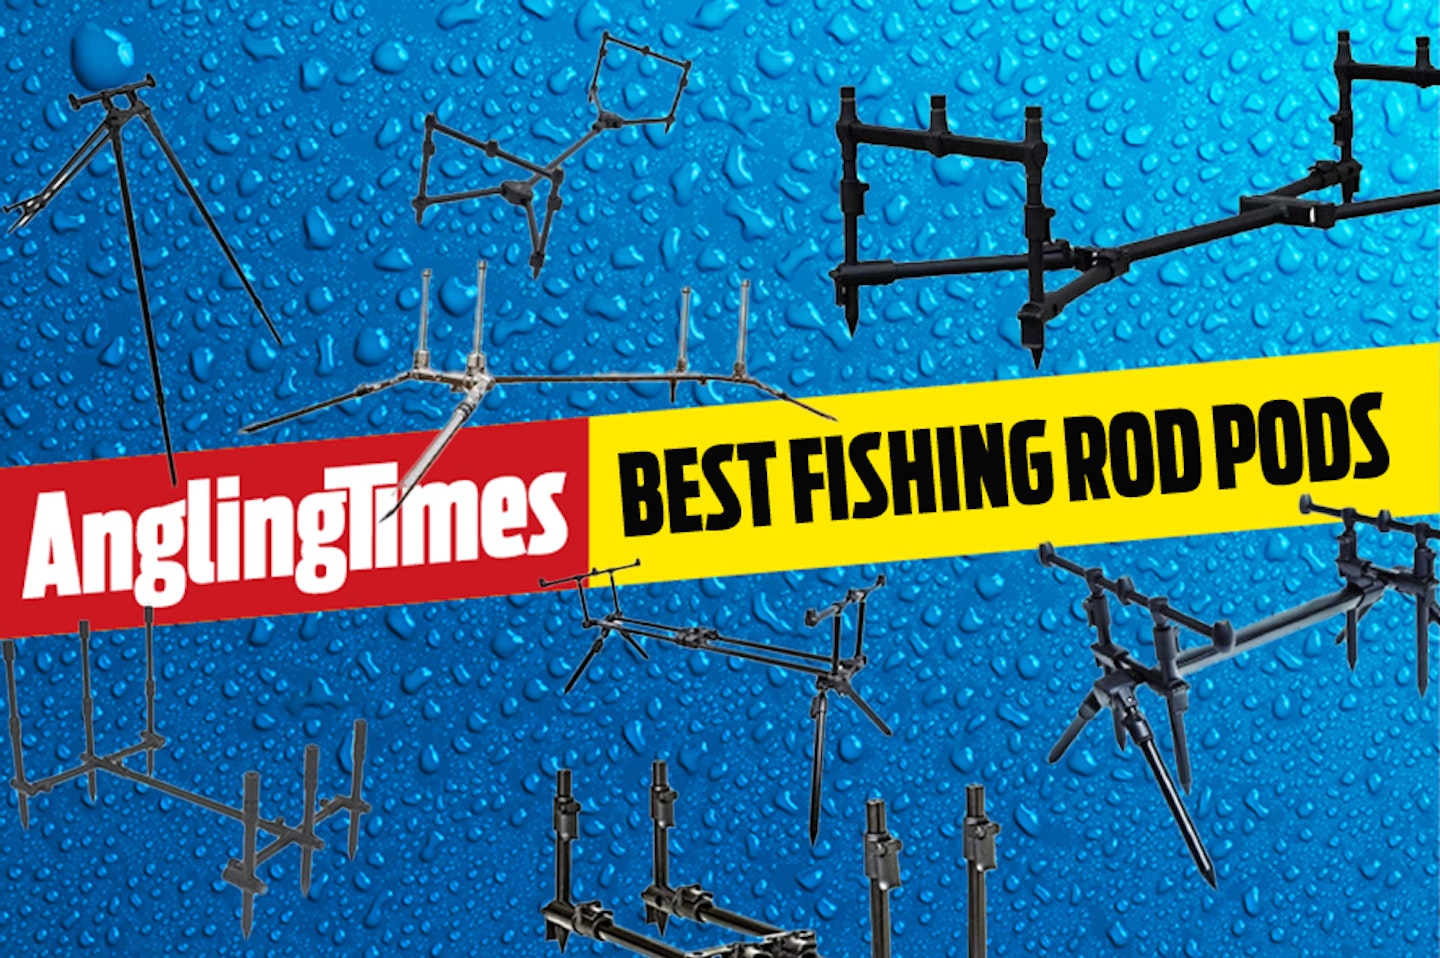 The best rod pods